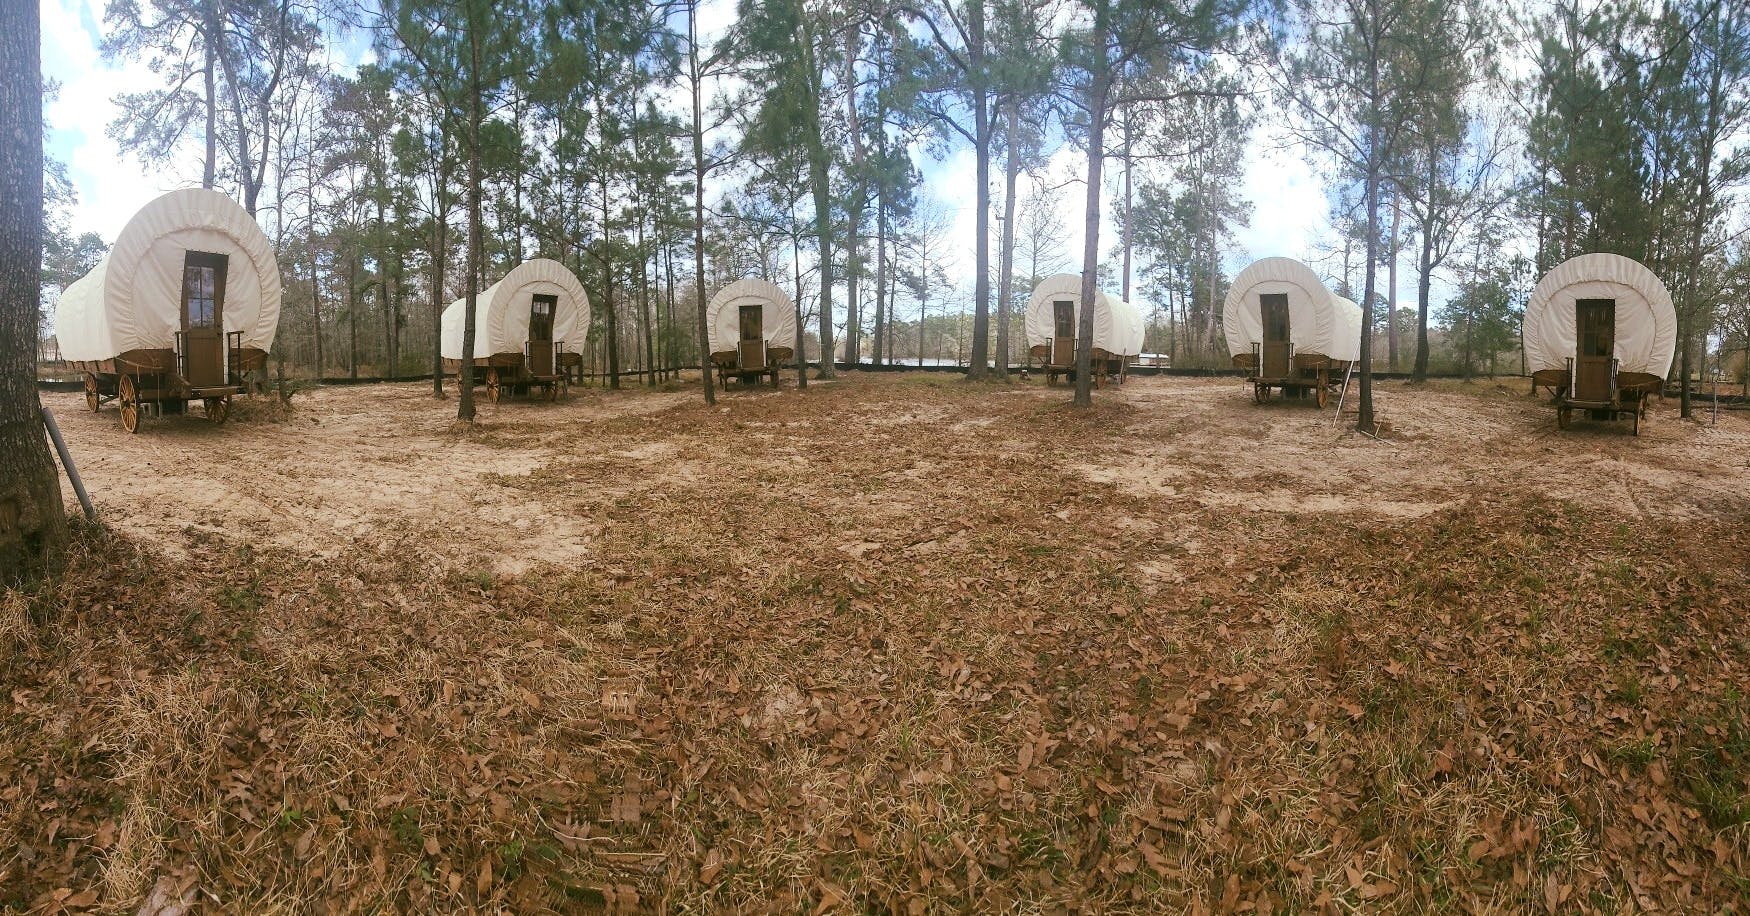 Under Construction No More - The Story Behind 3 New Campgrounds